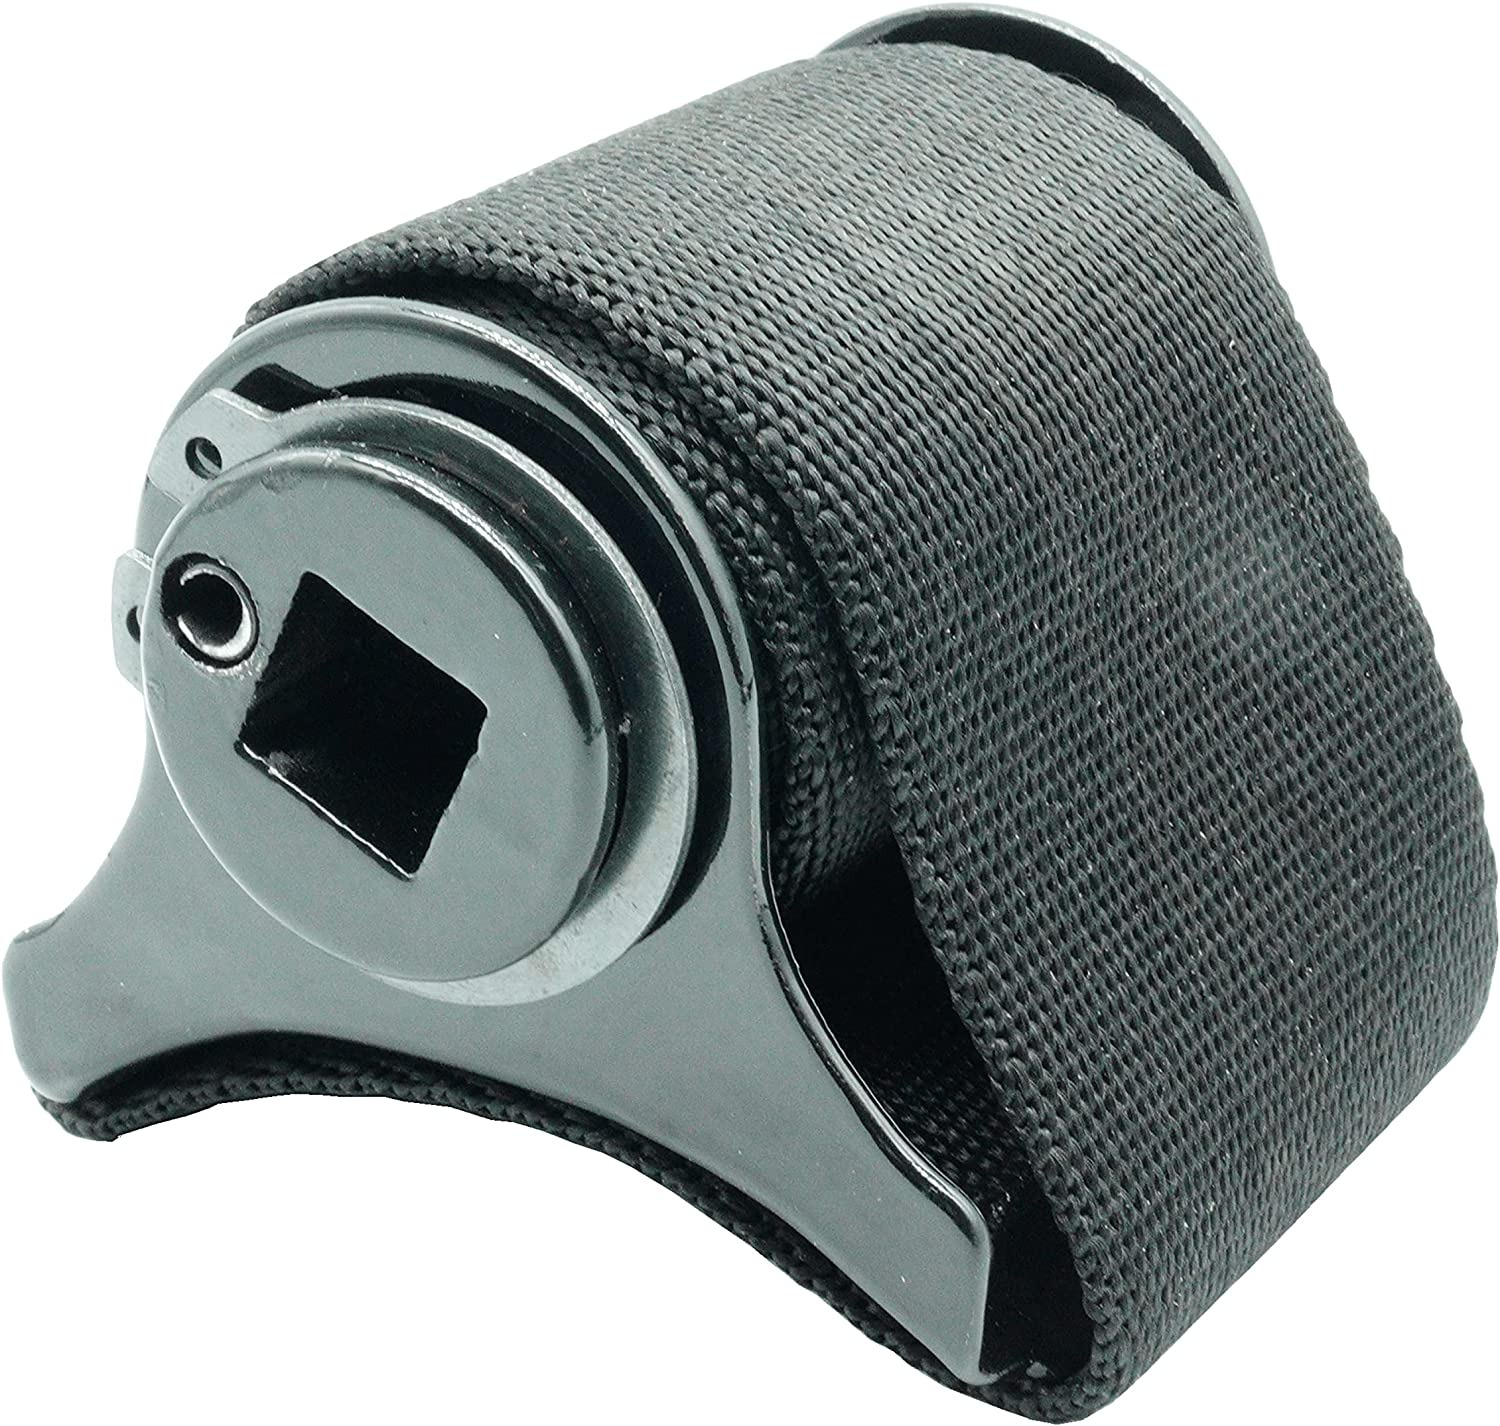 Filter Strap Wrench Compatible with Caterpiller 185-3630 Oil Filter Wrench Repla